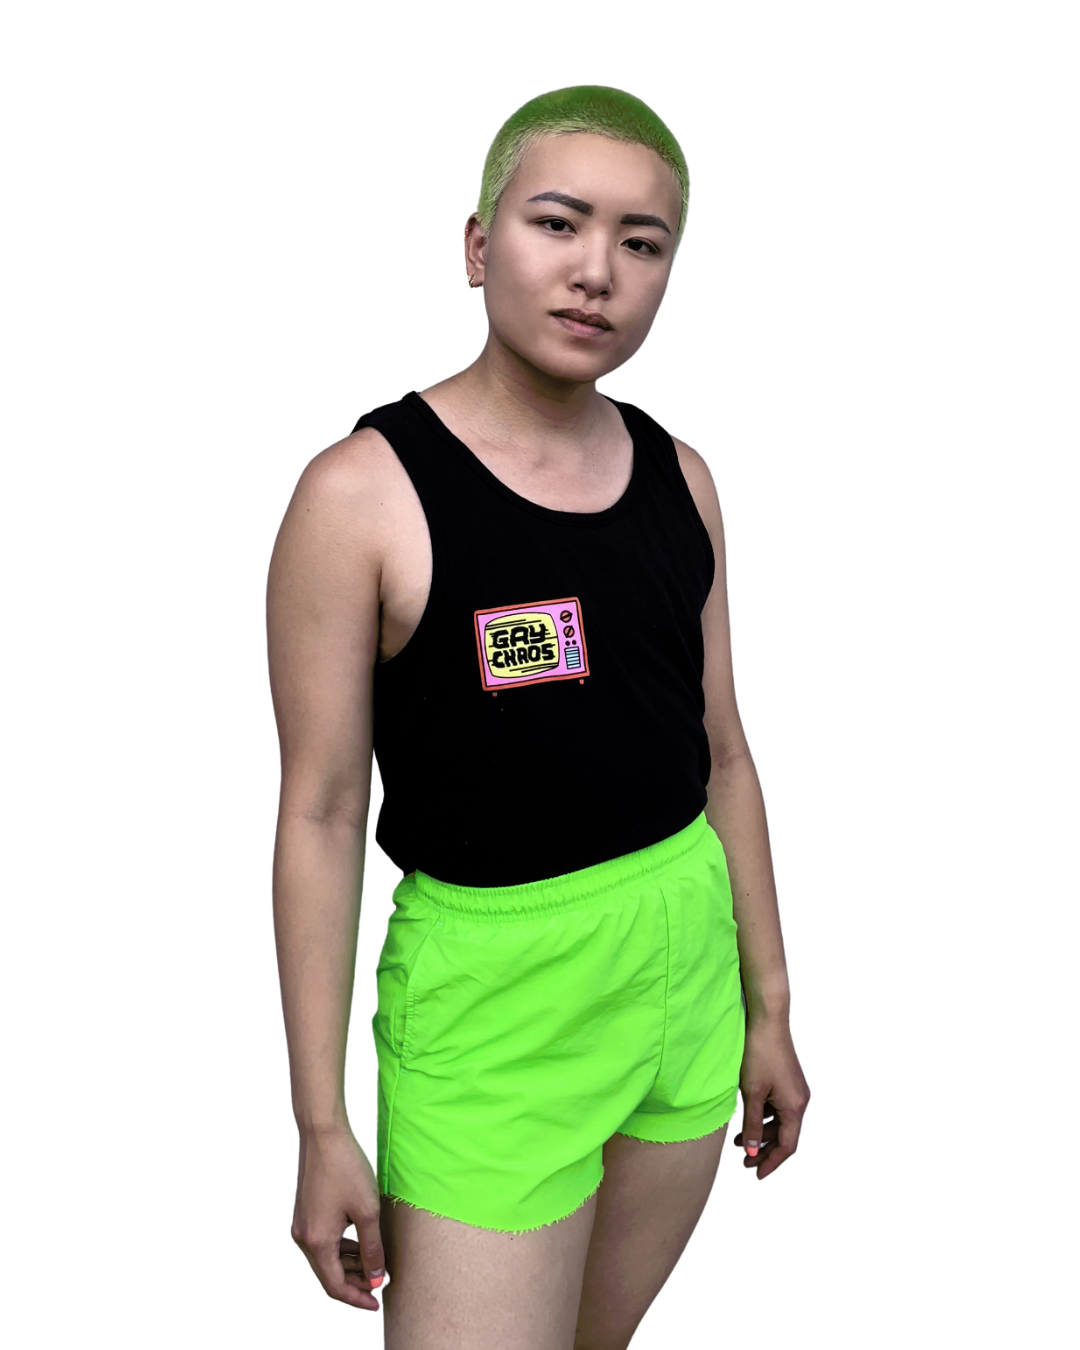 Viv is wearing the Gay Chaos black tank top. They have green buzz hair and are wearing bright green shorts.